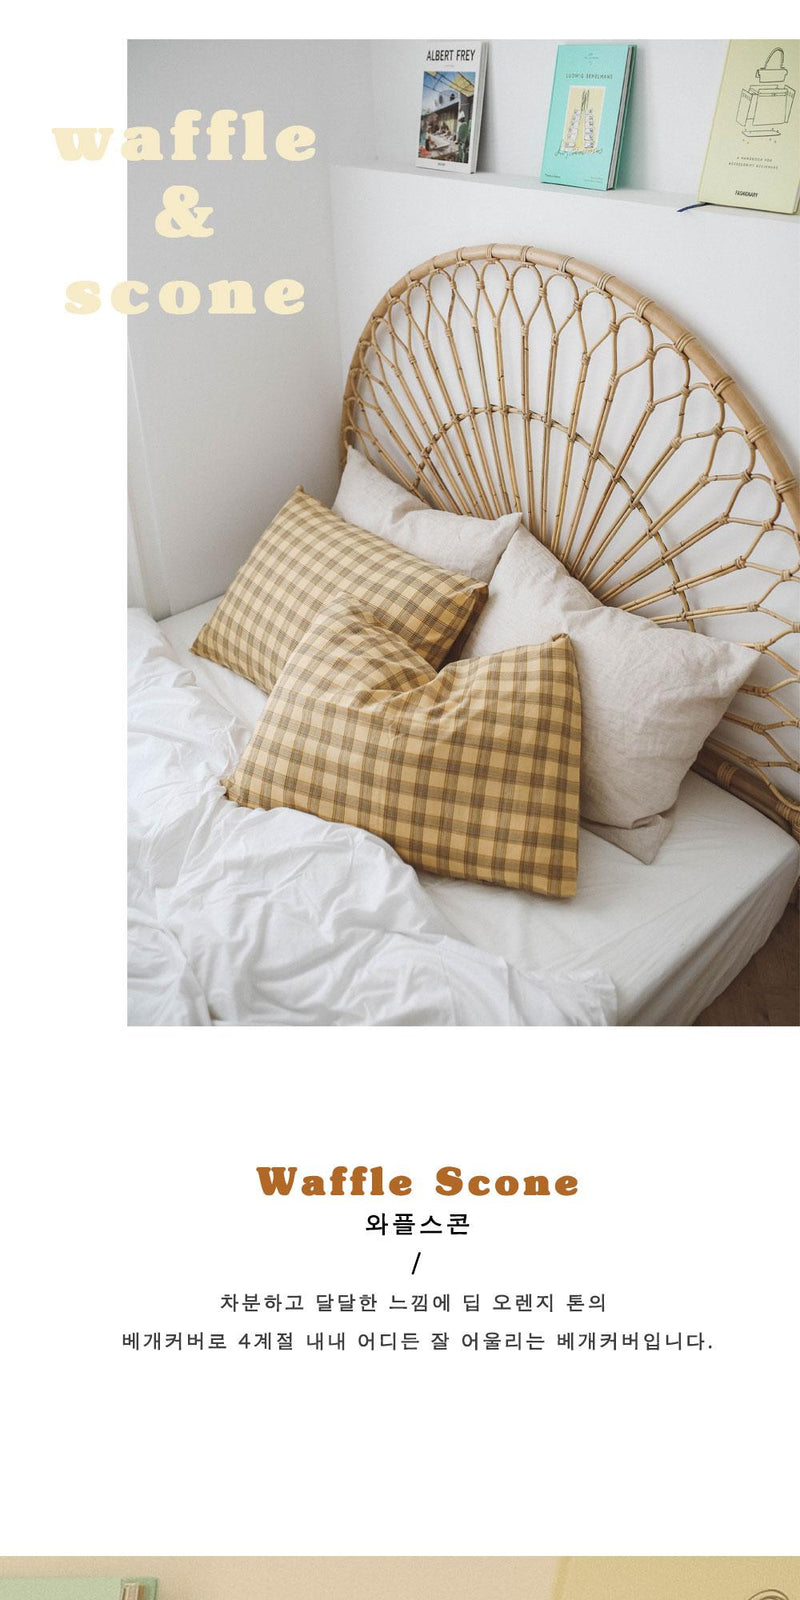 Waffle scone pillow cover